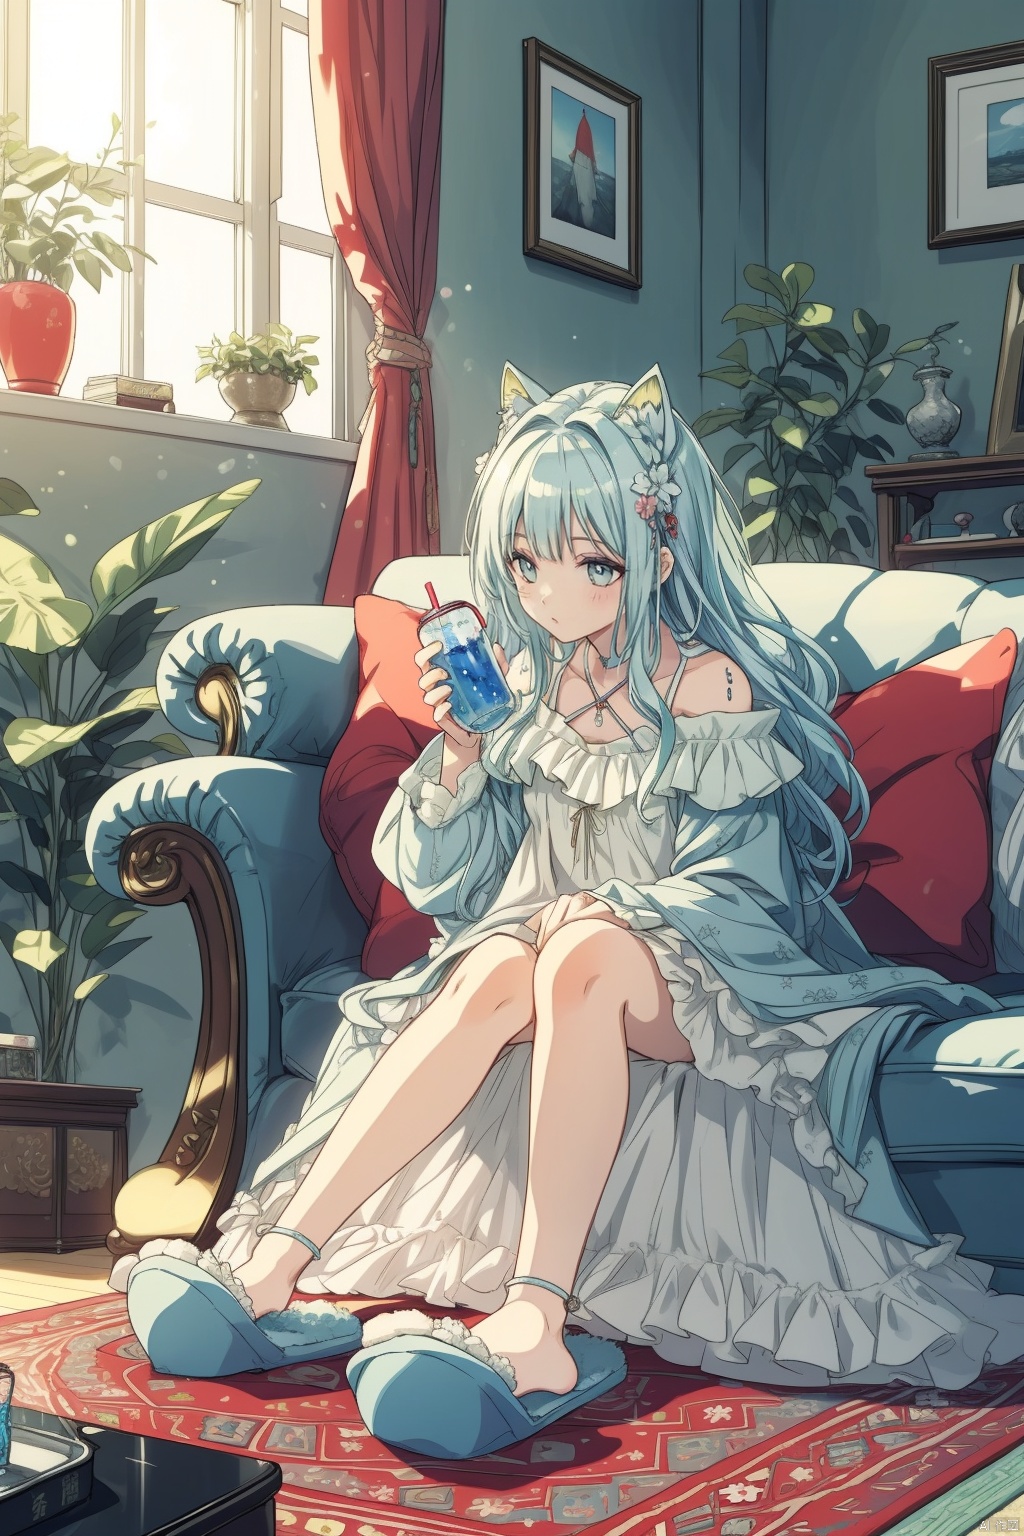  masterpiece, panorama,1 girl, cute, solo focus, long curly hair, light blue hair, happy face, delicate dress, hair spin, ((sitting on sofa)), slippers, a delicate sitting room, deep of field, a photo frame on the wall, velvet curtains, sofa in modern minimalist style, Stuffed toys on the floor,drinking soft drink,((carpet)) on the floor, game consoles scattered on the floor, summer holiday, drinking soft drinks, beautiful flowers around her, backlight, mLD, cozy anime, (\ji jian\), akebi komichi, green eyes